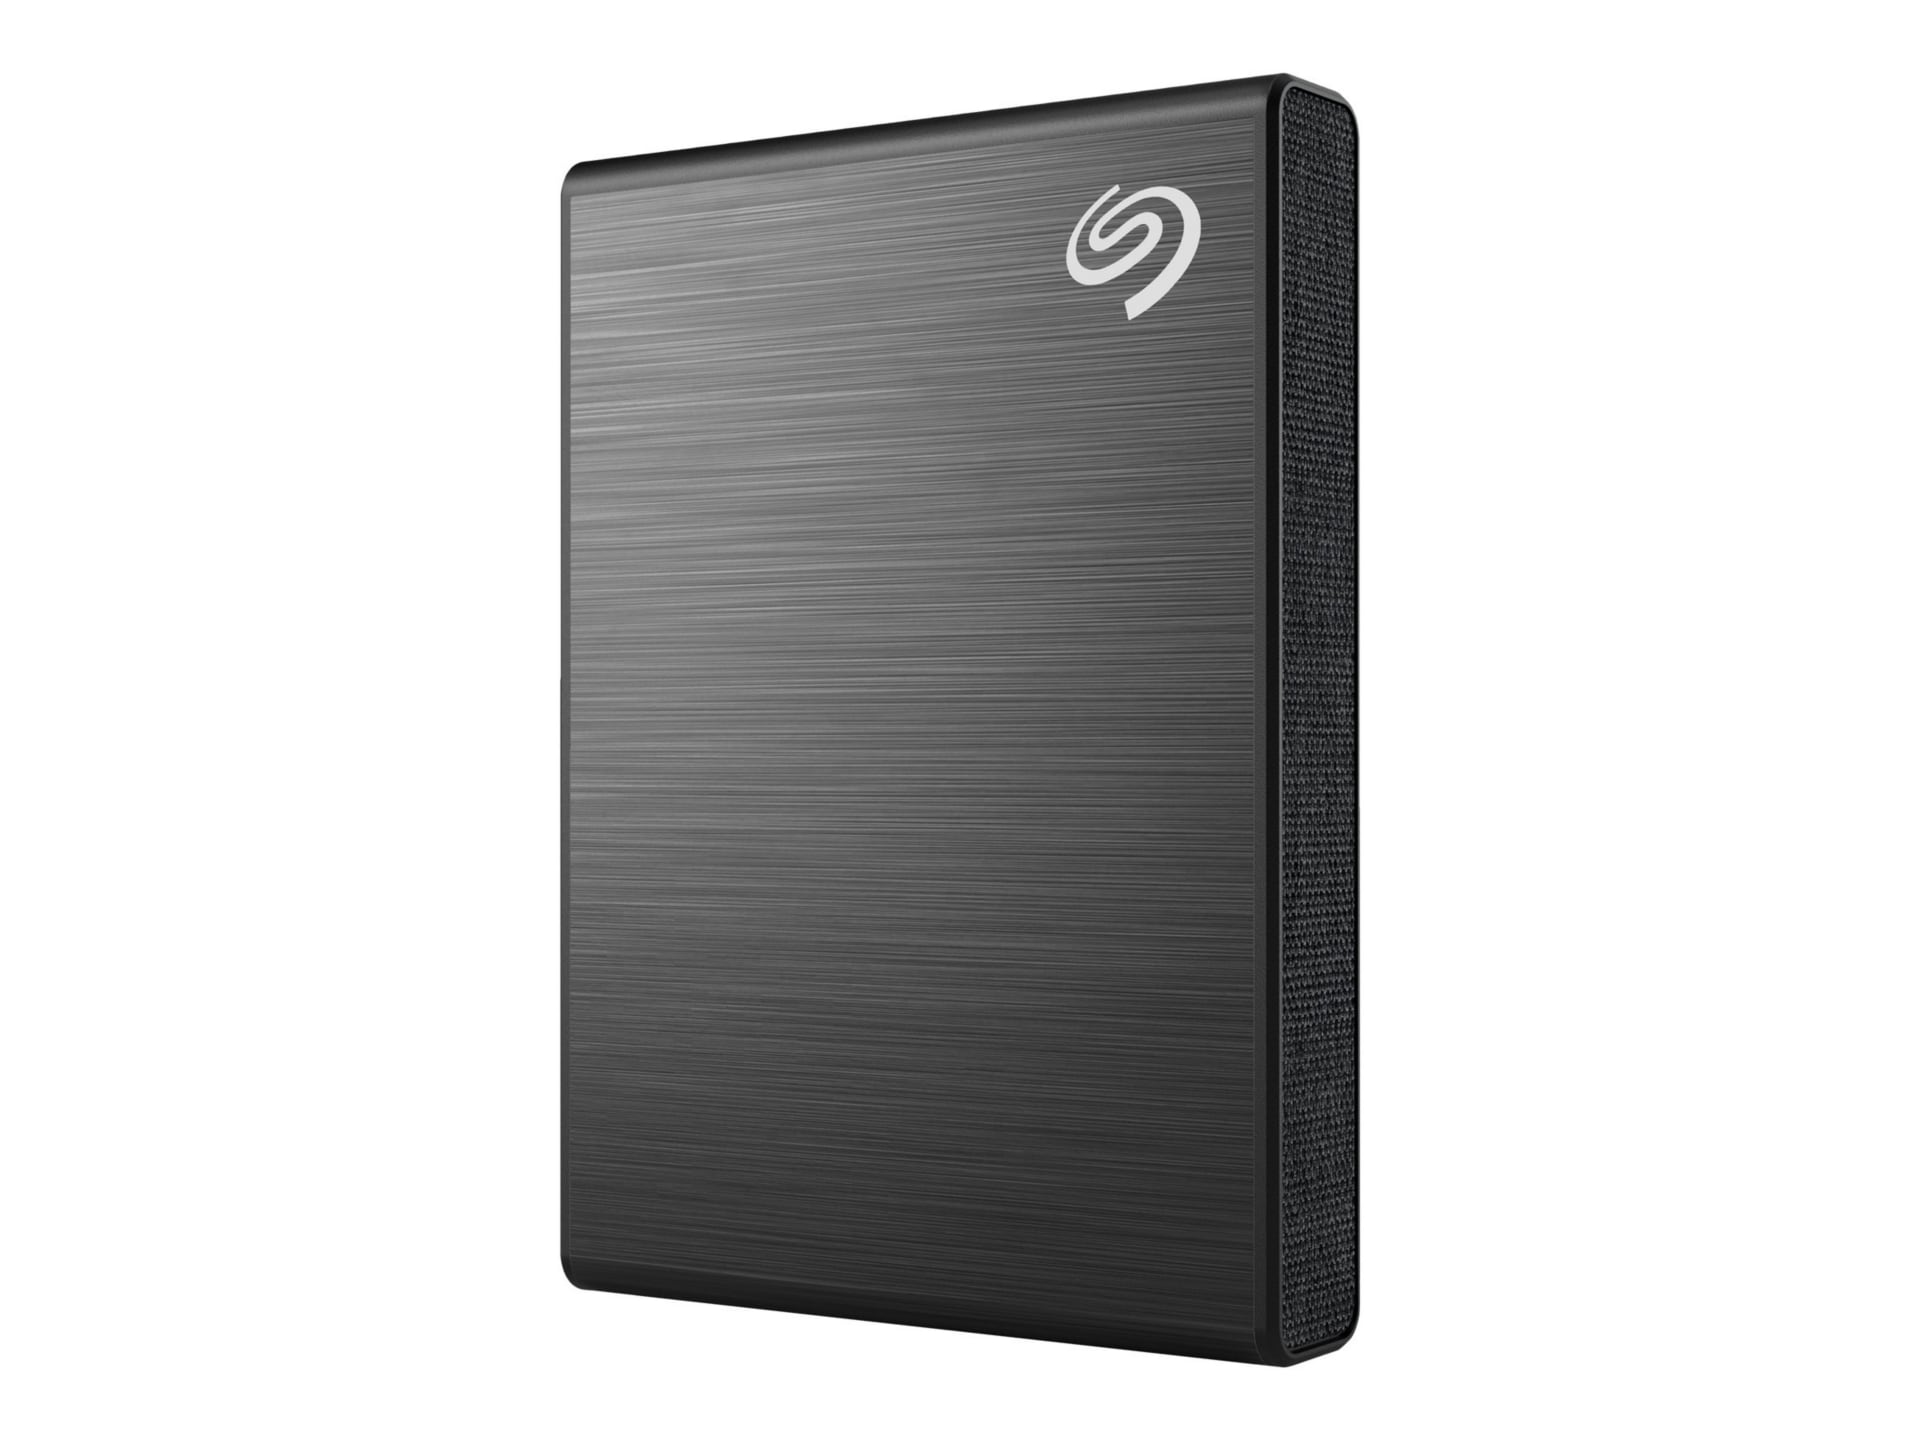 Seagate One Touch SSD STKG1000400 - SSD - 1 To - USB 3.0